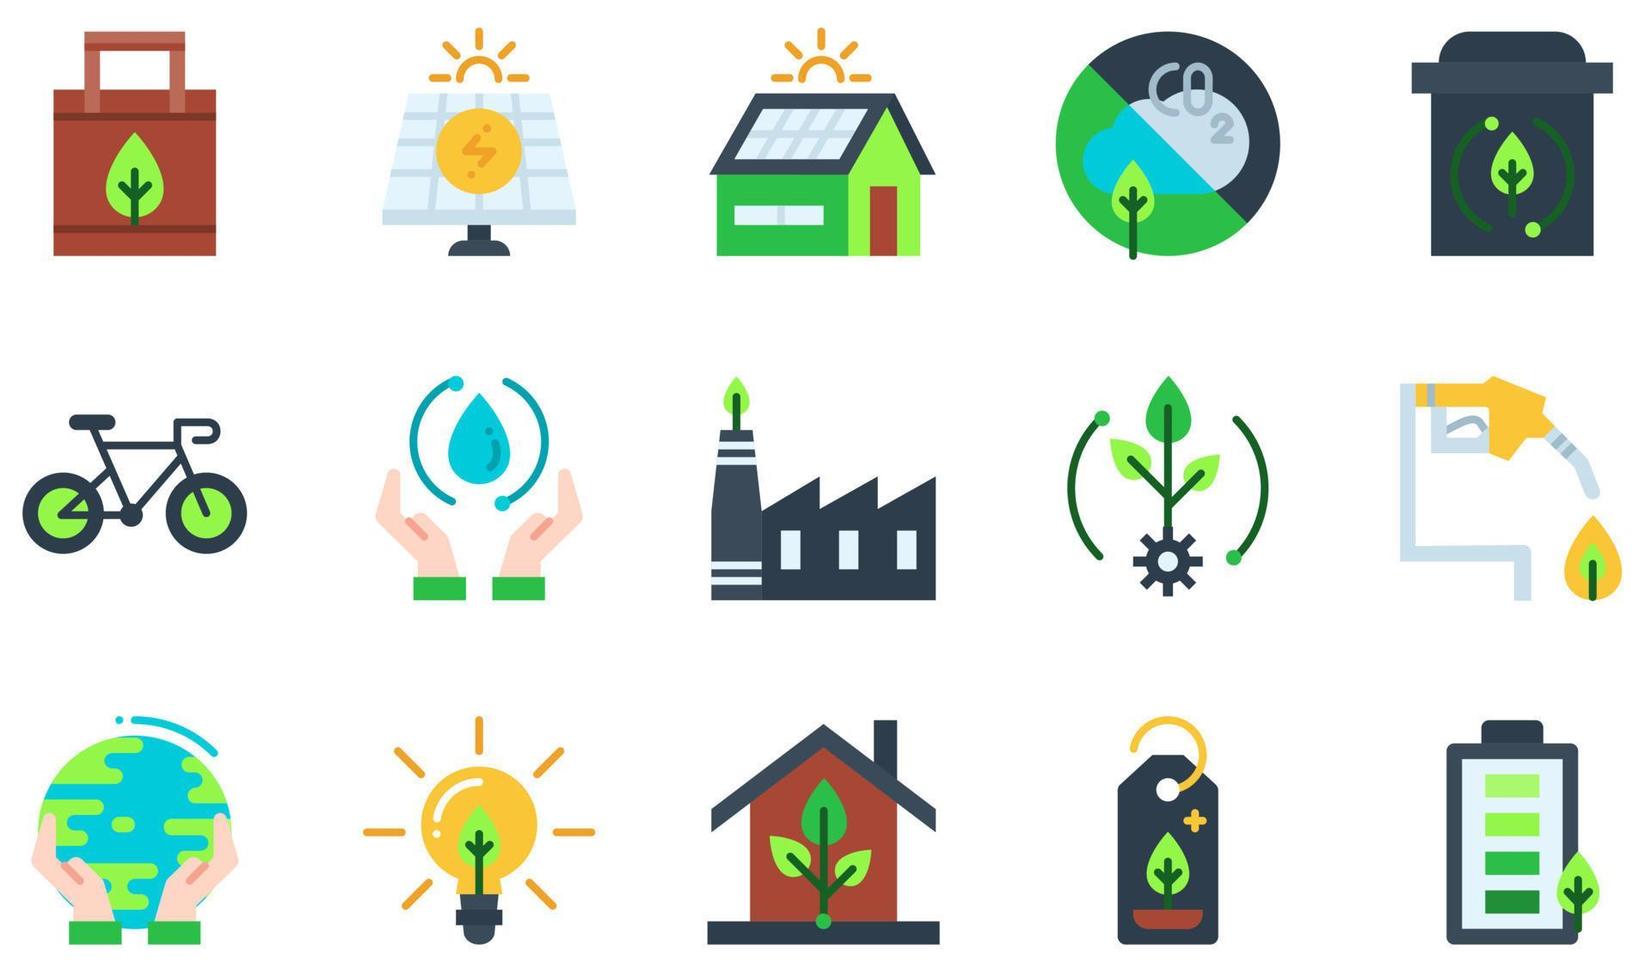 Set of Vector Icons Related to Ecology. Contains such Icons as Eco Bag, Solar Panel, Zero Emission, Recycle Bin, Ecosystem, Protect Earth and more.